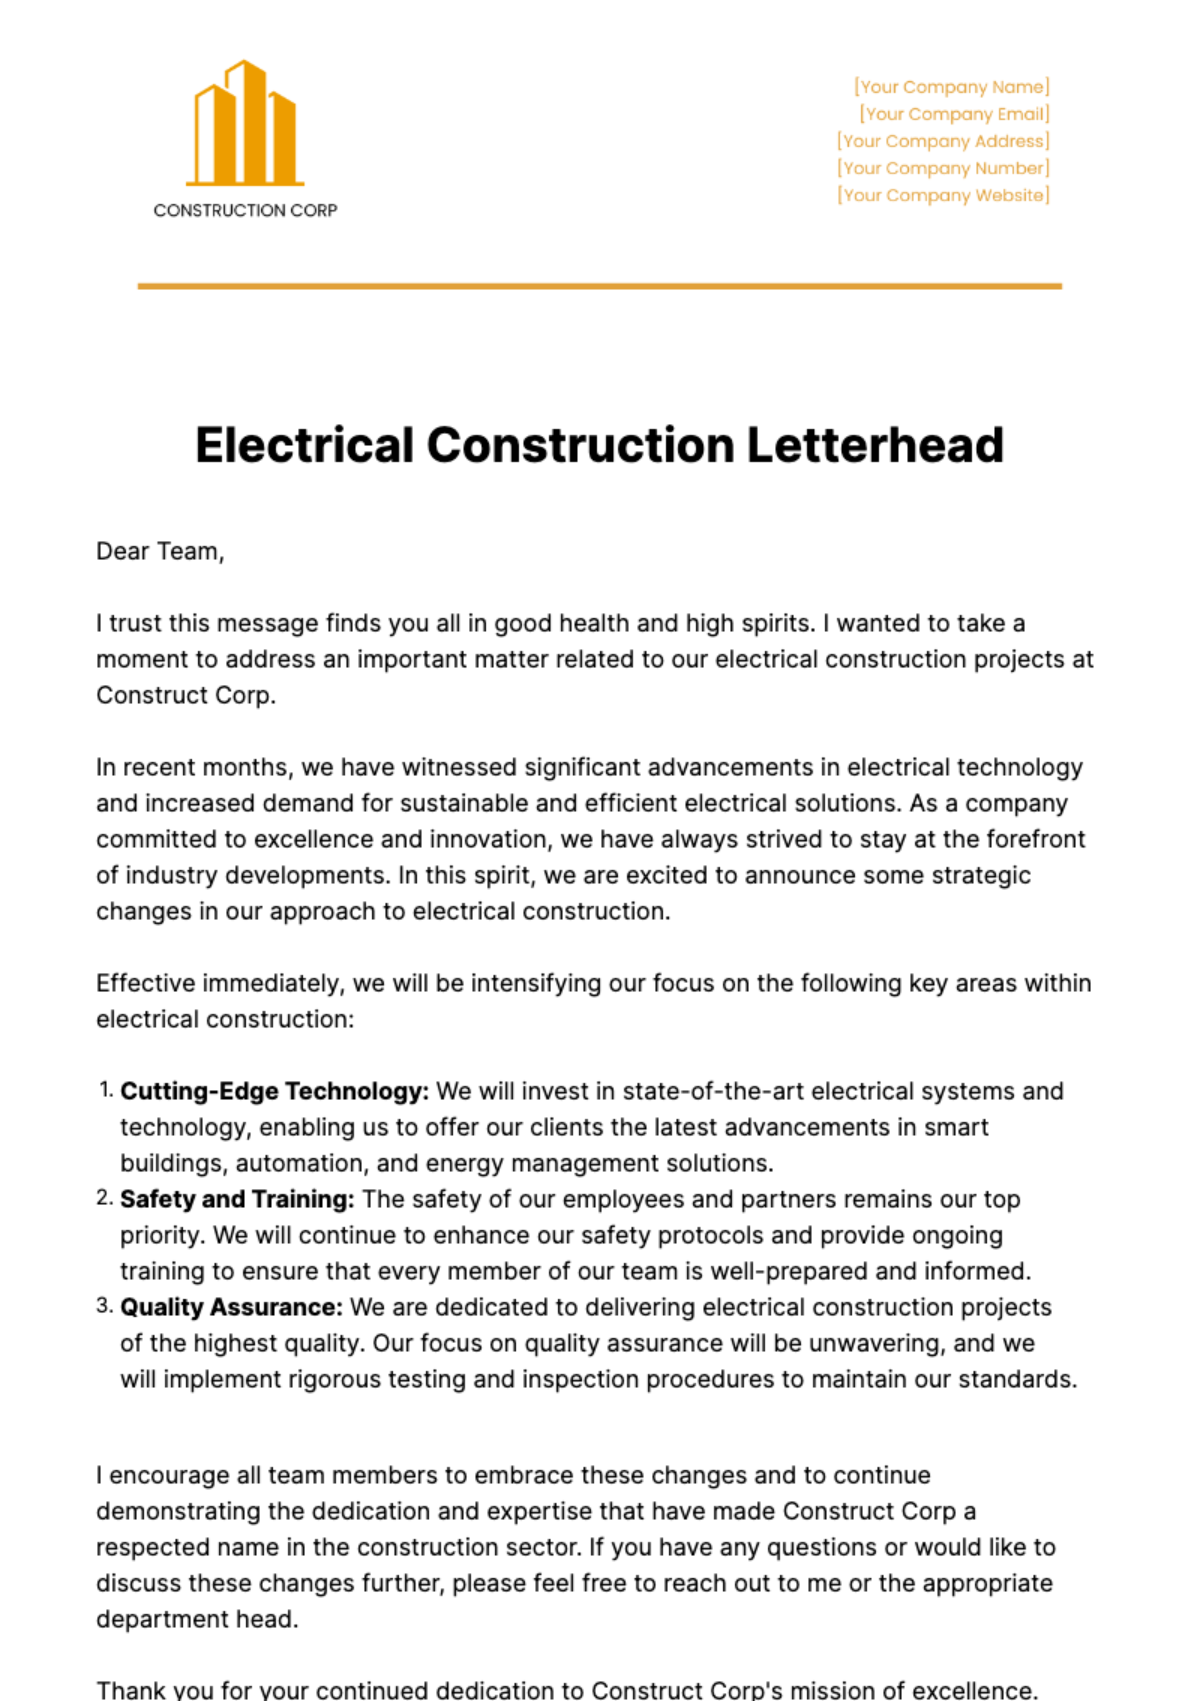 Free Electrical Construction Letterhead Template